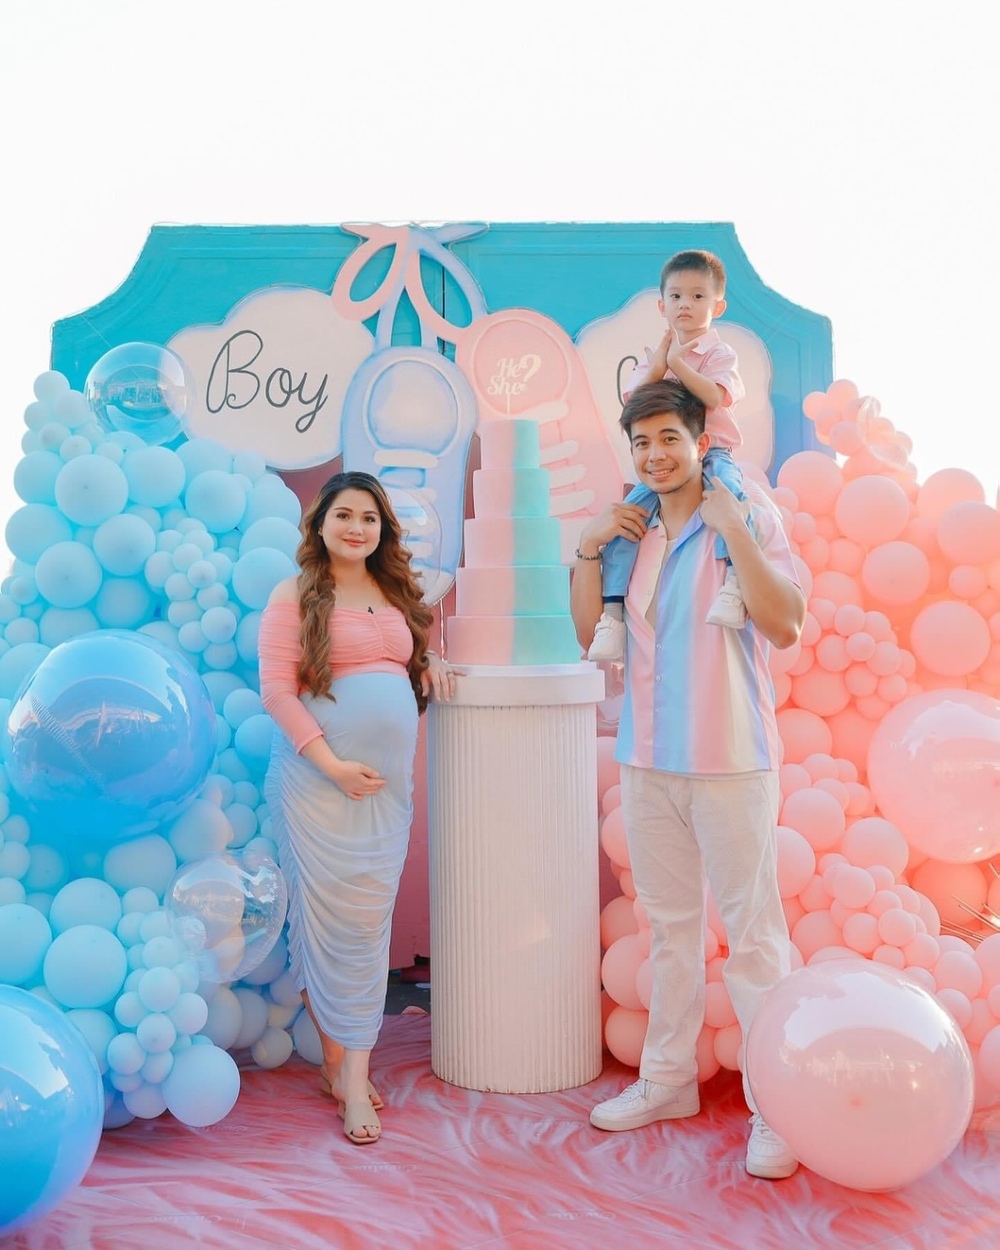 Dianne Medina and Rodjun Cruz are expecting to welcome their second child—a baby girl—this year, after gender reveal party